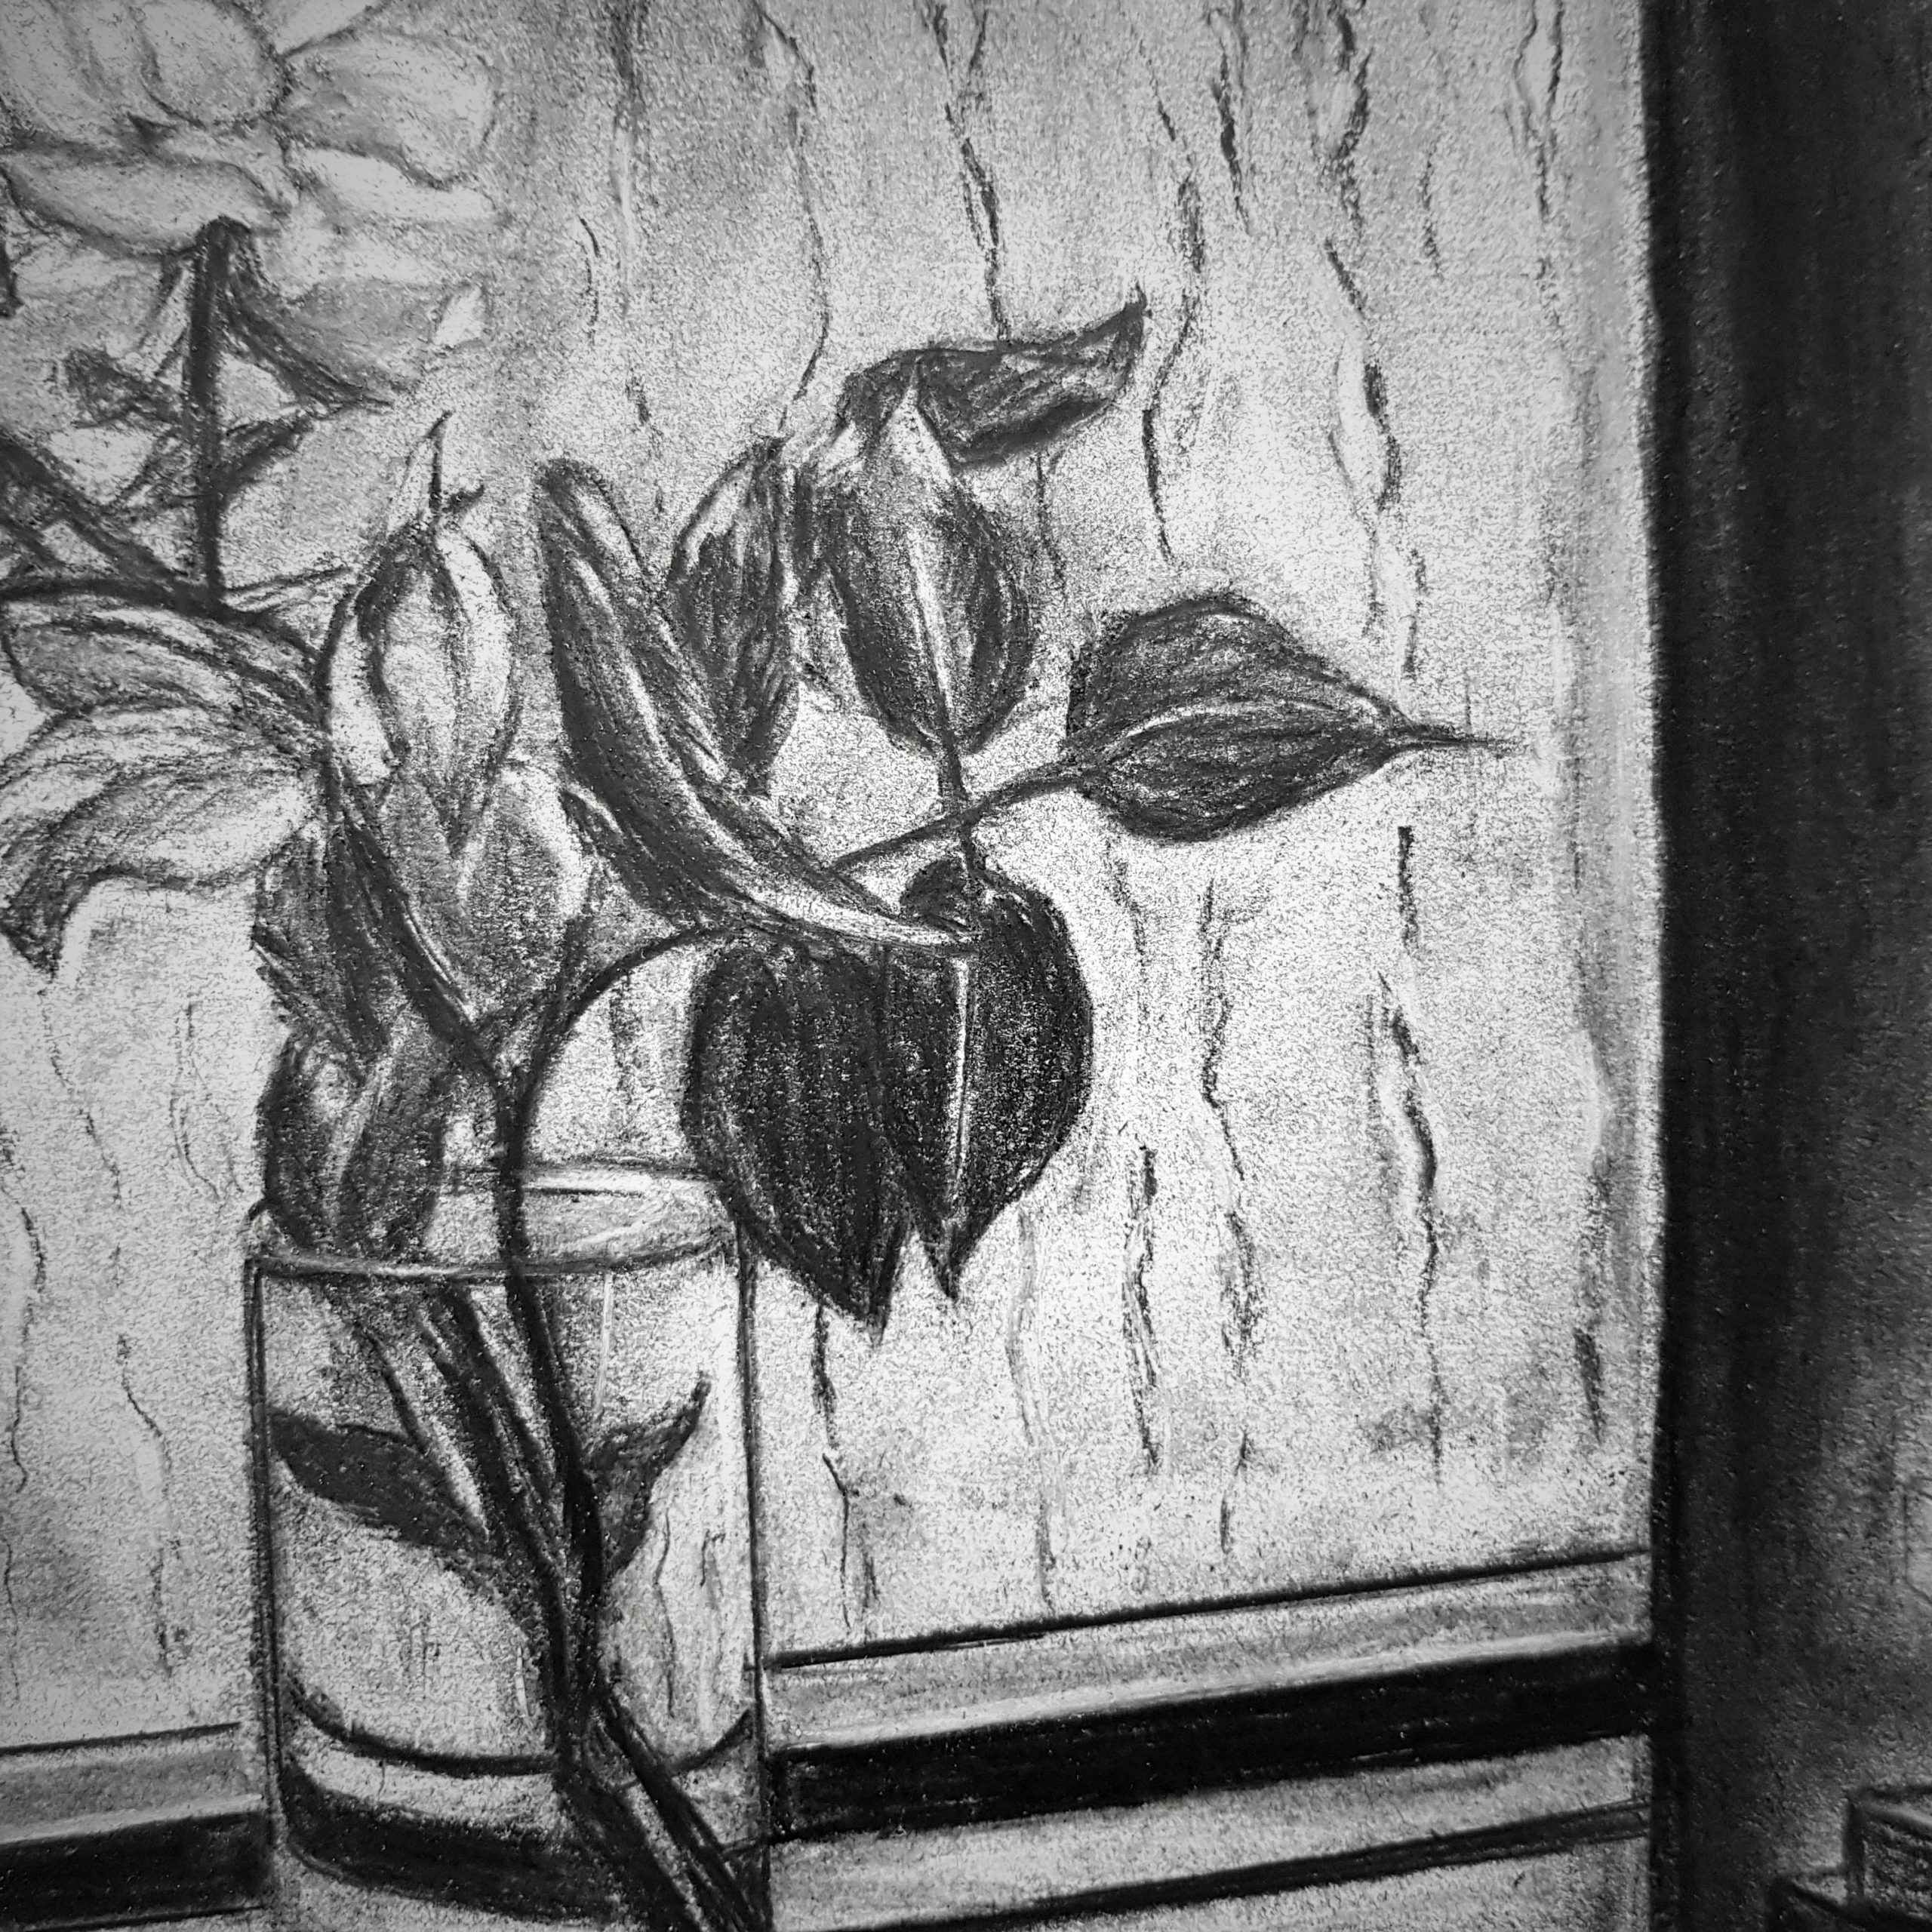 A rainy day ; Charcoal drawing